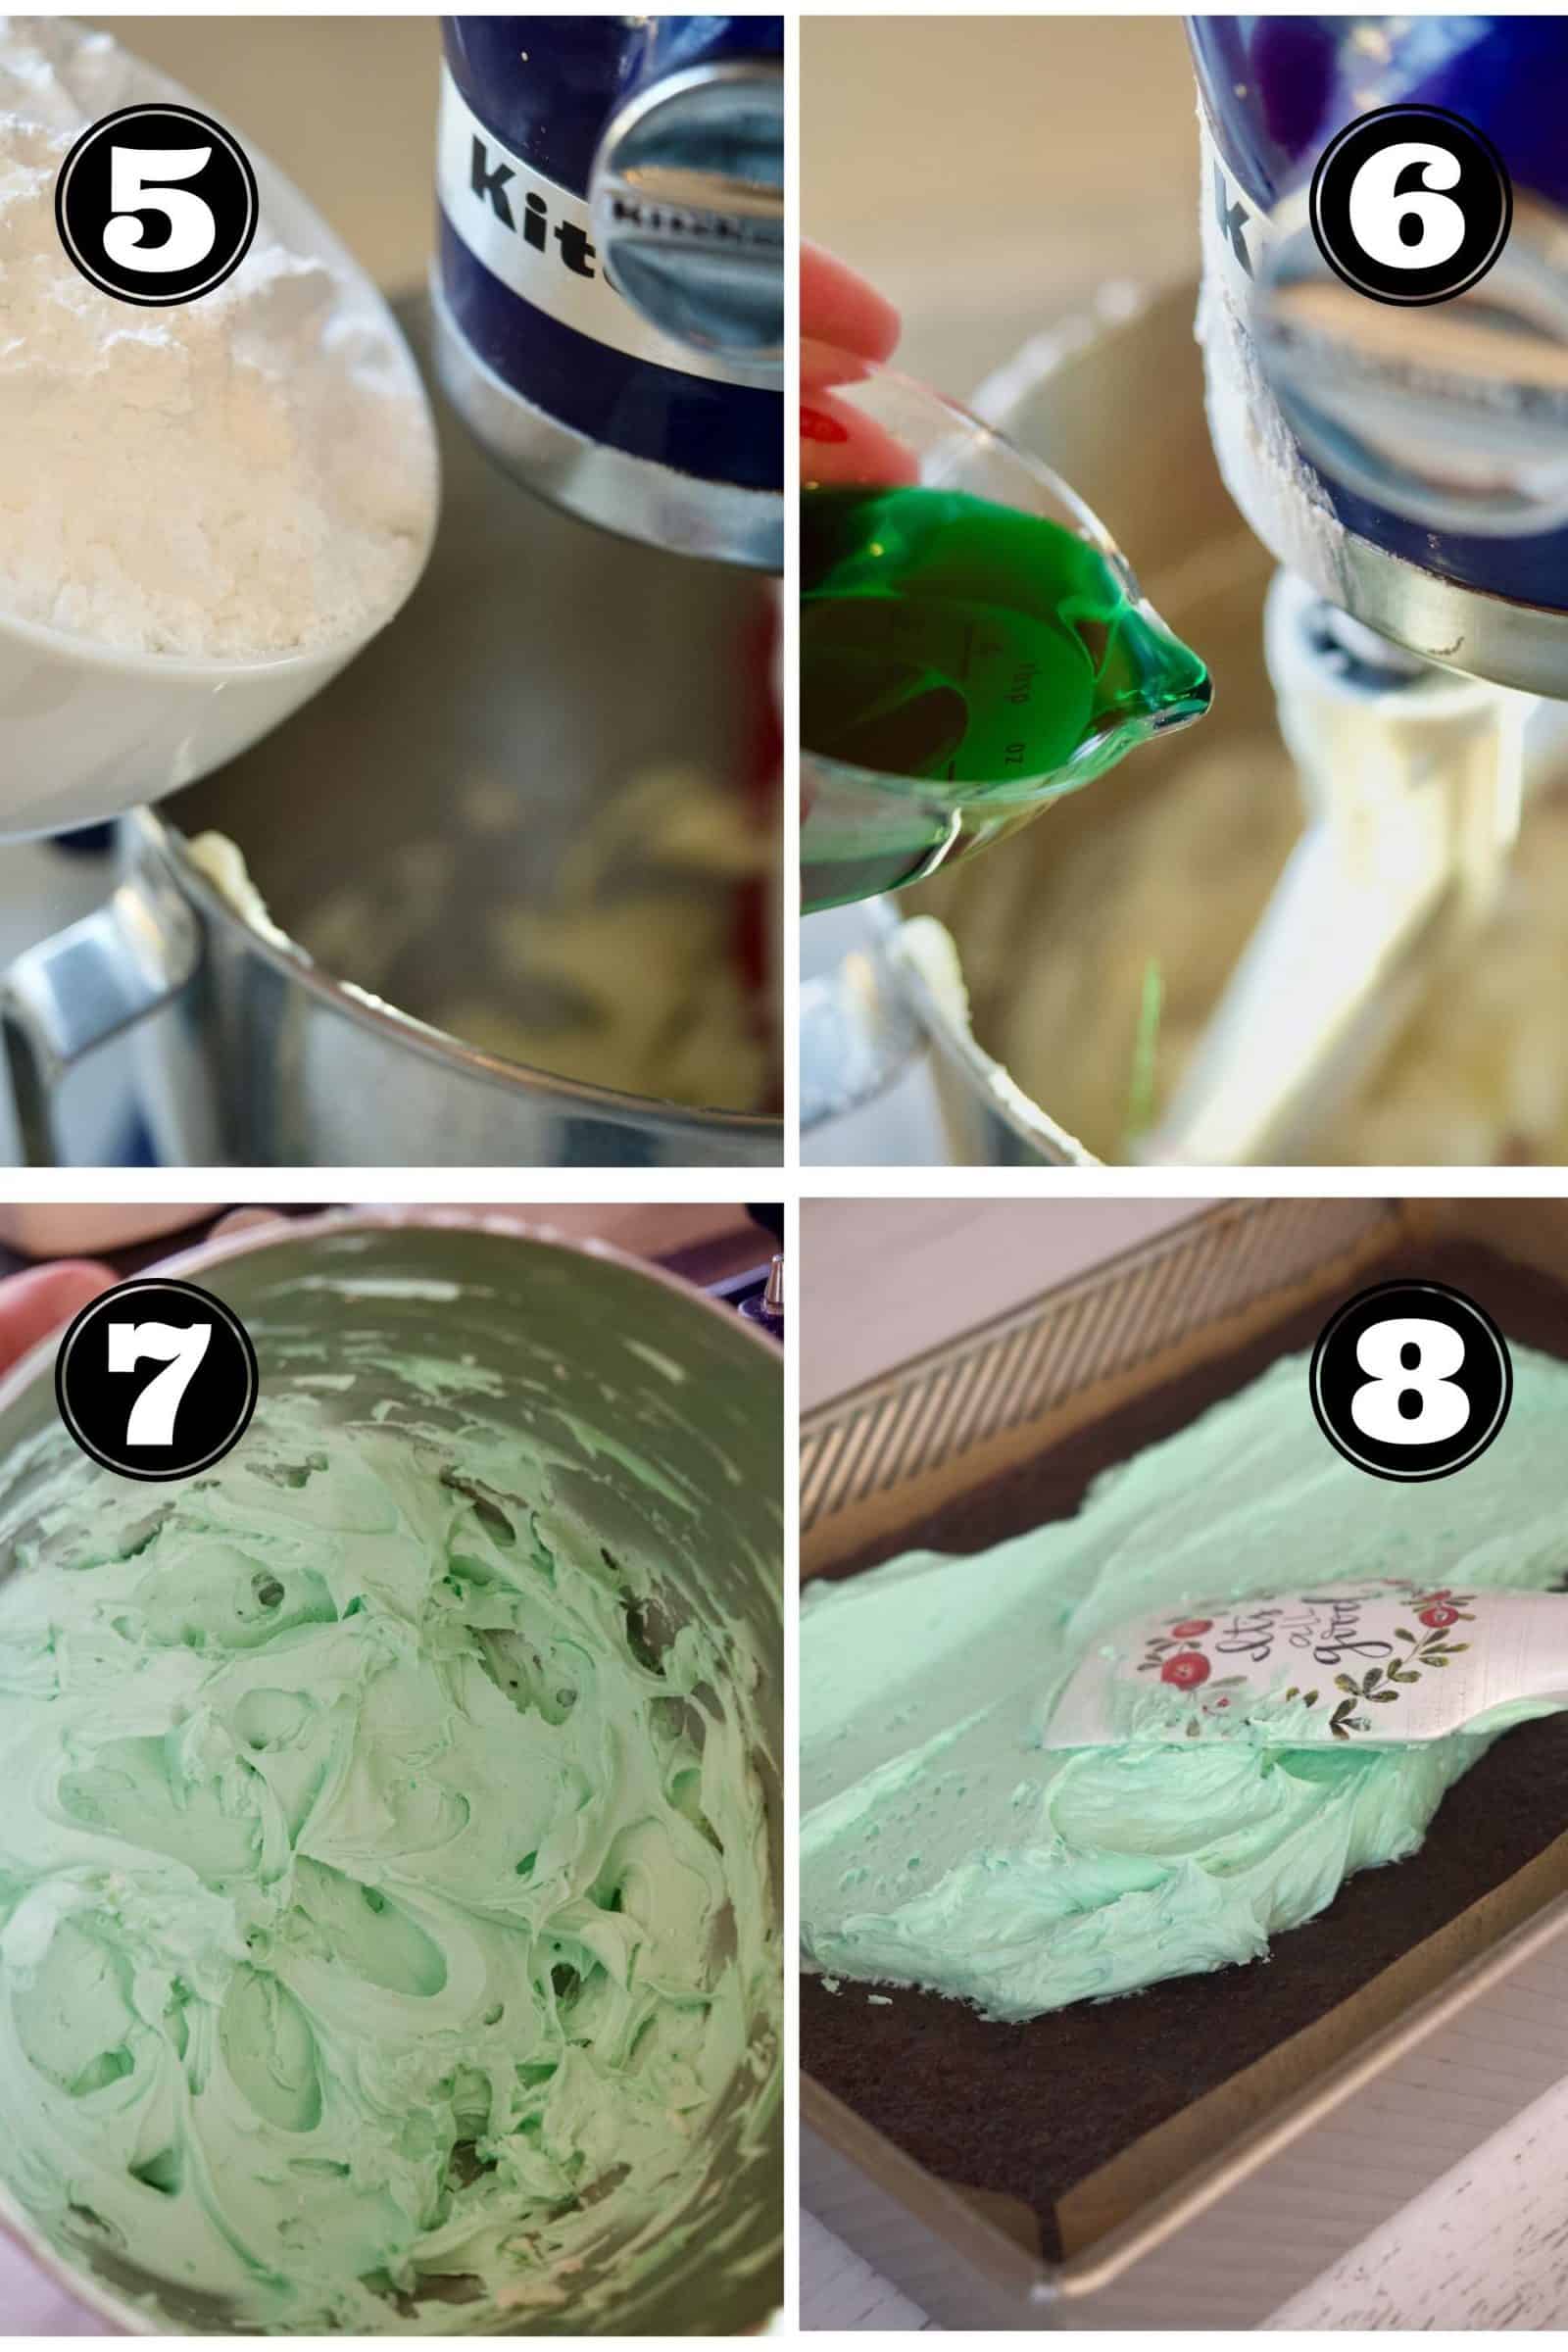 Process shots for Creme De Menthe filling. 5. pouring powdered sugar in with butter. 6. adding creme de menthe 7. fluffy green buttercream. 8. spreading on cooled brownies.